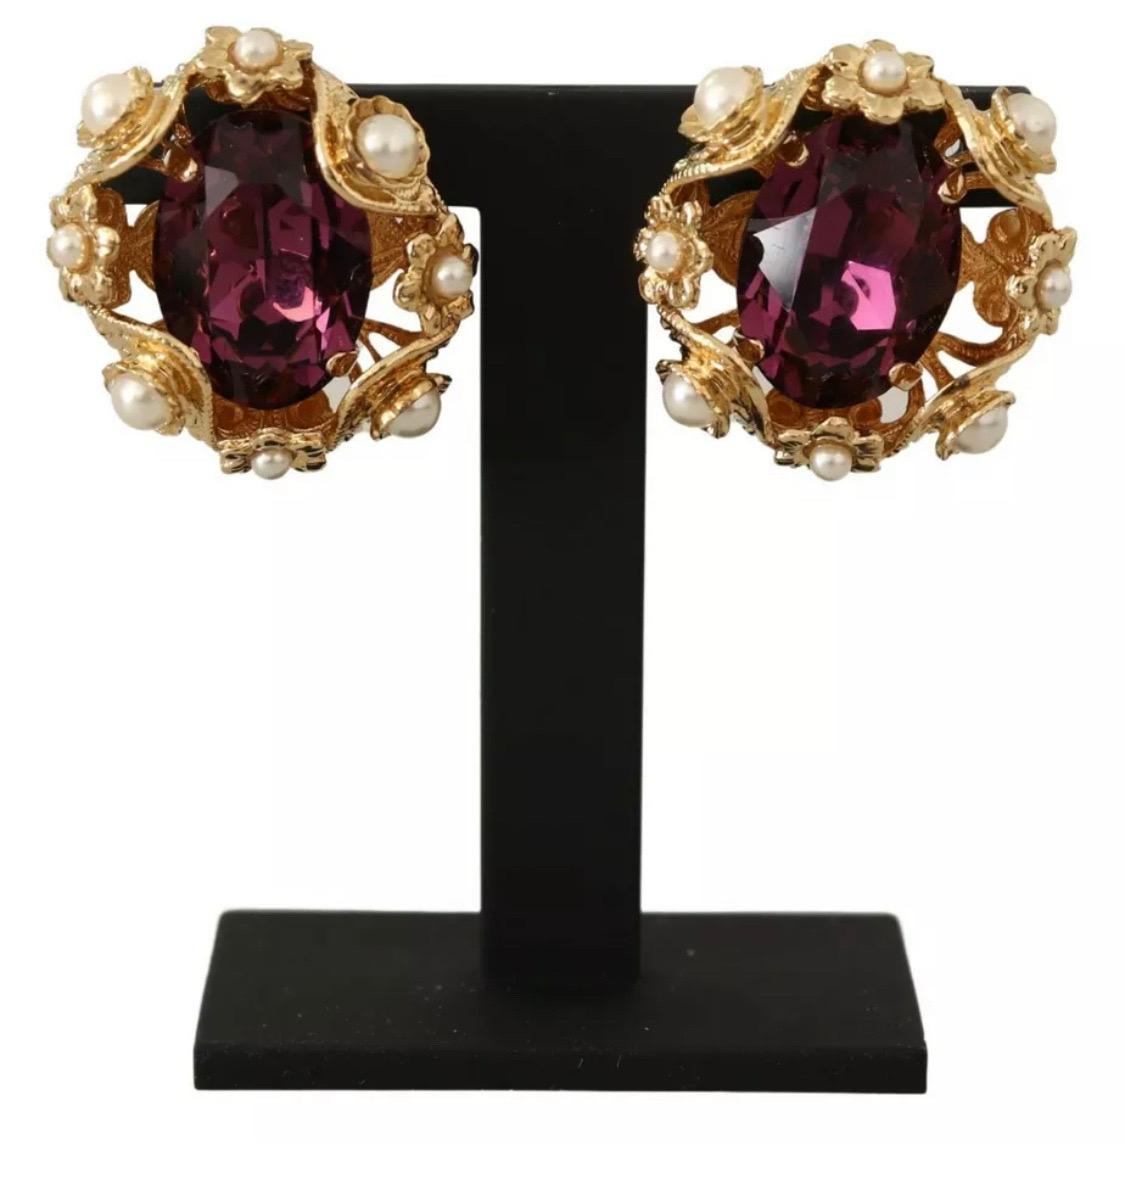 DOLCE & GABBANA

Gorgeous brand new with tags, 100% Authentic Dolce & Gabbana earrings.

Model: Clip-on, dangling
Motive: Sicily
Material: 60% Brass, 10% Plastic, 30% Glass
Color: Gold with purple crystal, white pearls
Logo details
Made in